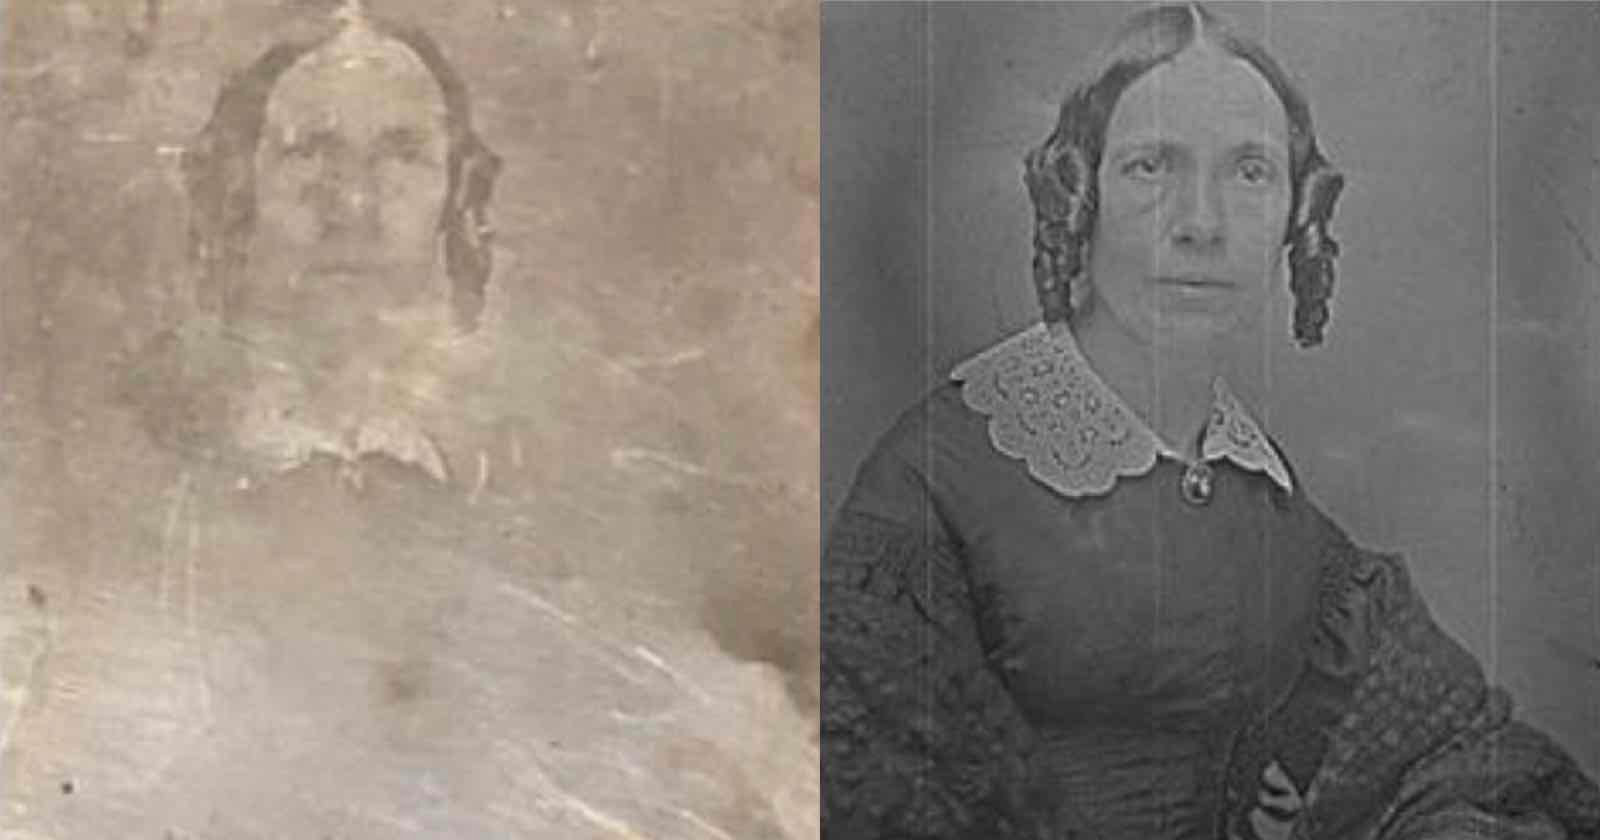 Researchers have developed a new technique for salvaging tarnished 19th-century daguerreotype photographs and revealing images that otherwise “s